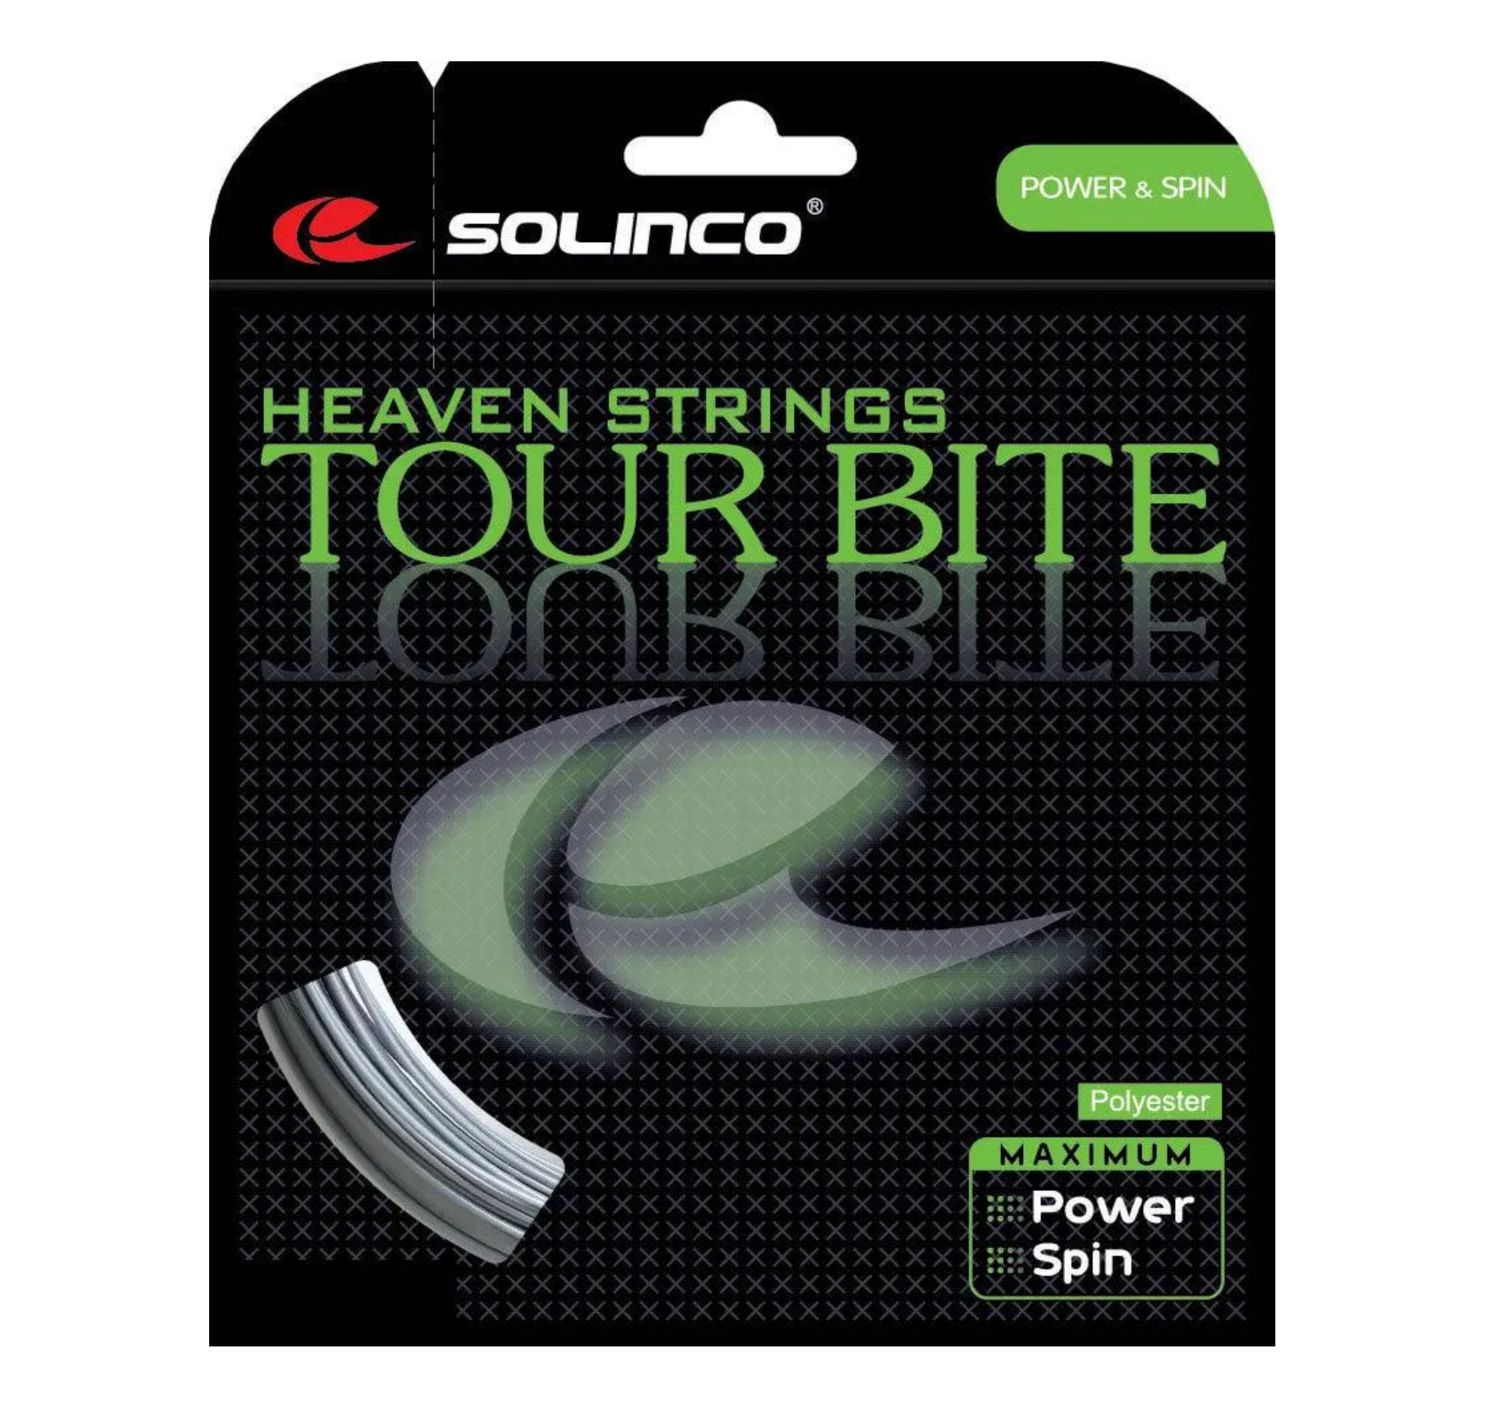 Close-up view of the Solinco Tour Bite 16L Tennis String